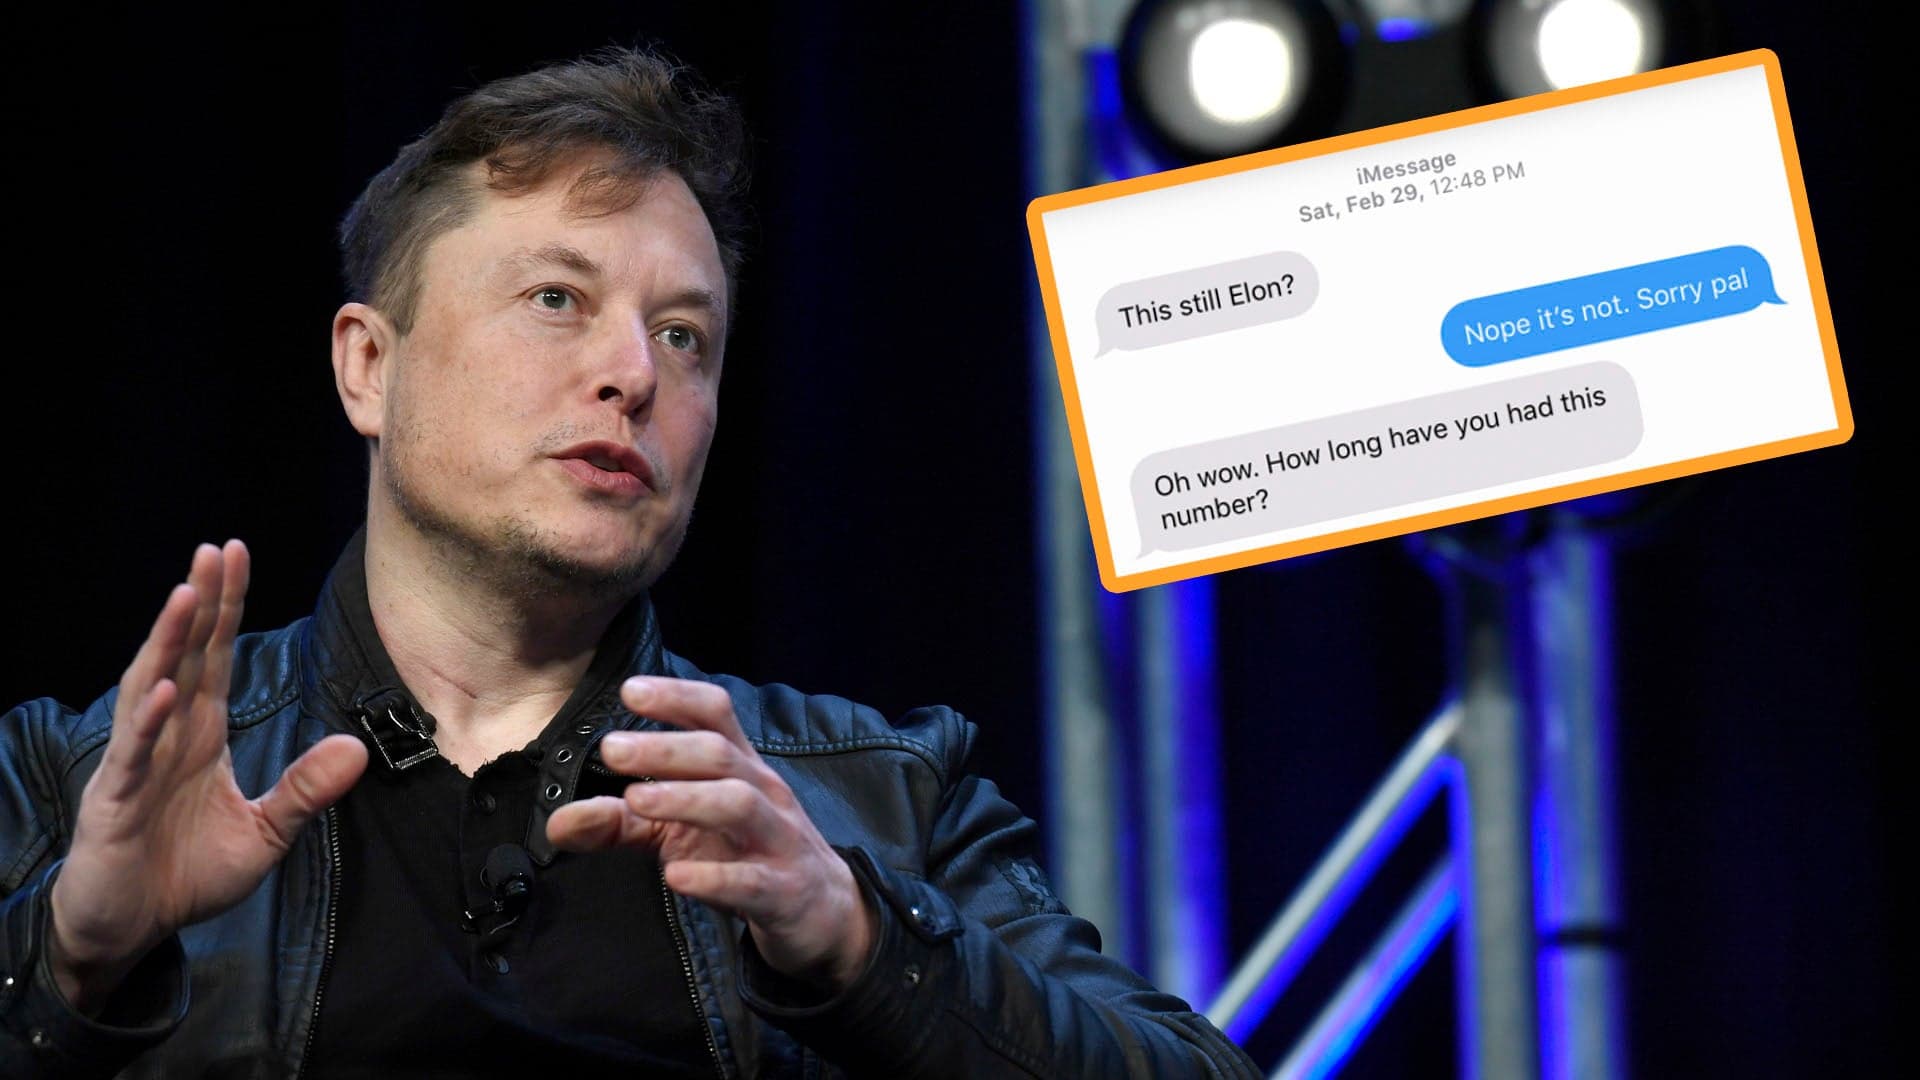 Please Leave the Nice Woman Who Has Elon Musk’s Old Phone Number Alone